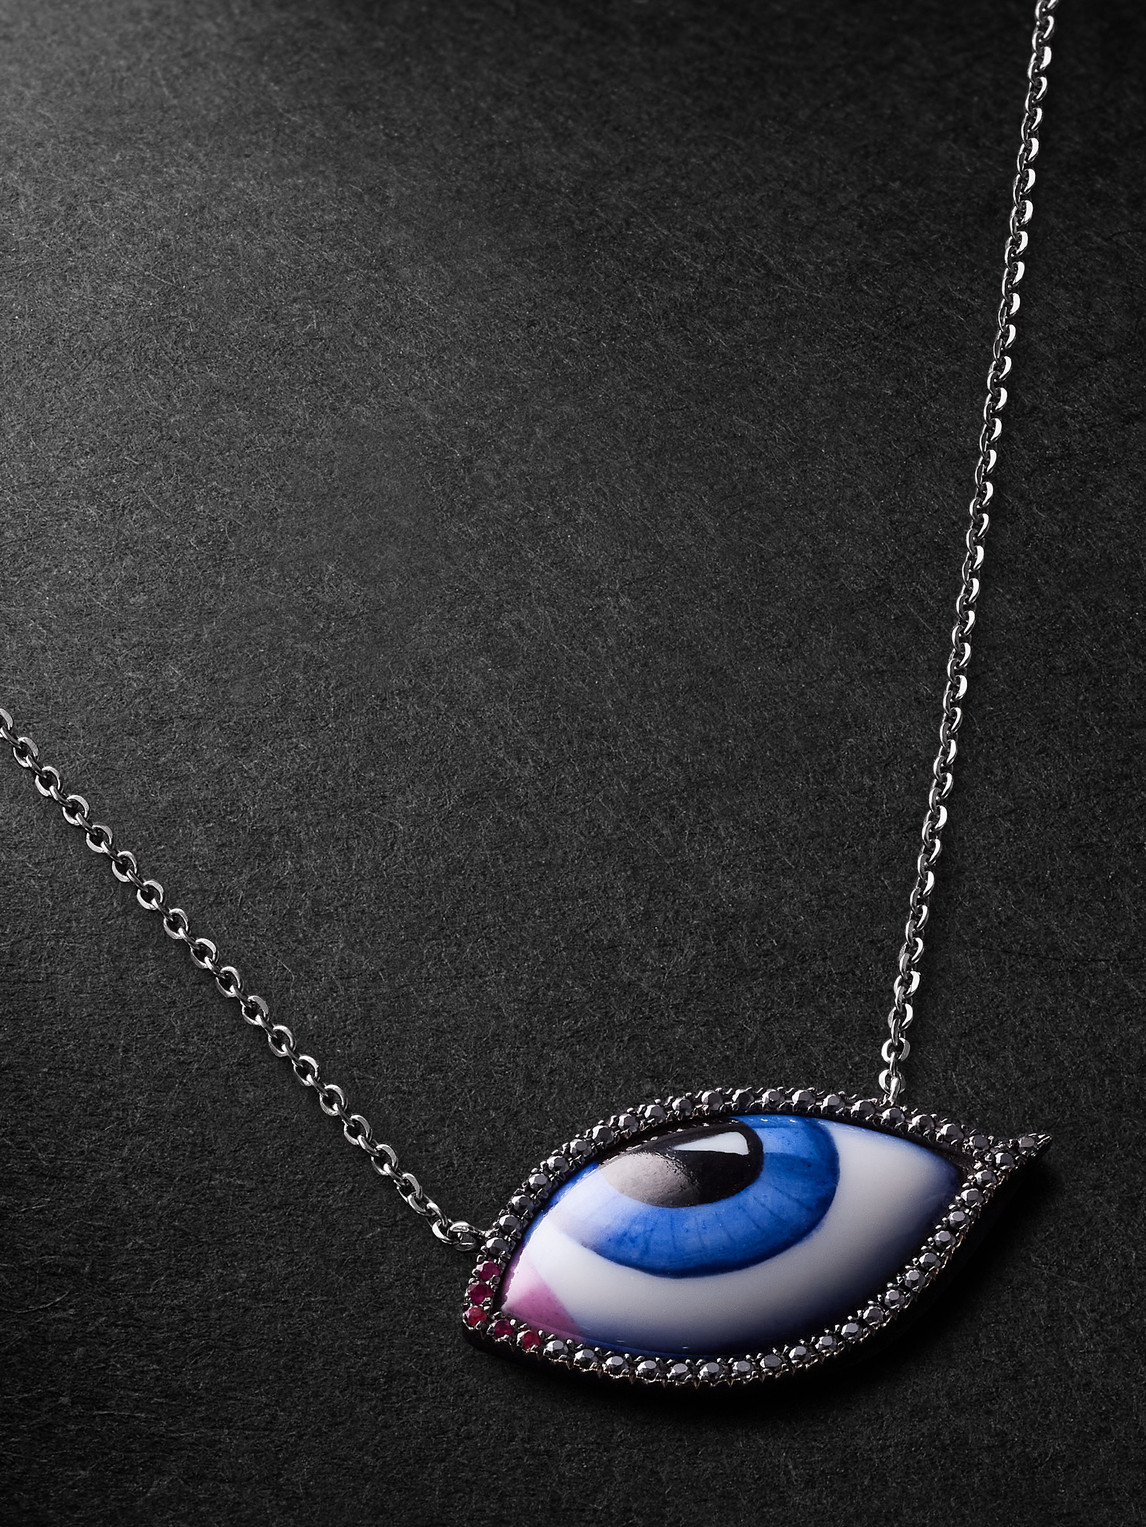 Shop Lito Grand Bleu Blackened White Gold, Diamond, Ruby And Enamel Necklace In Blue